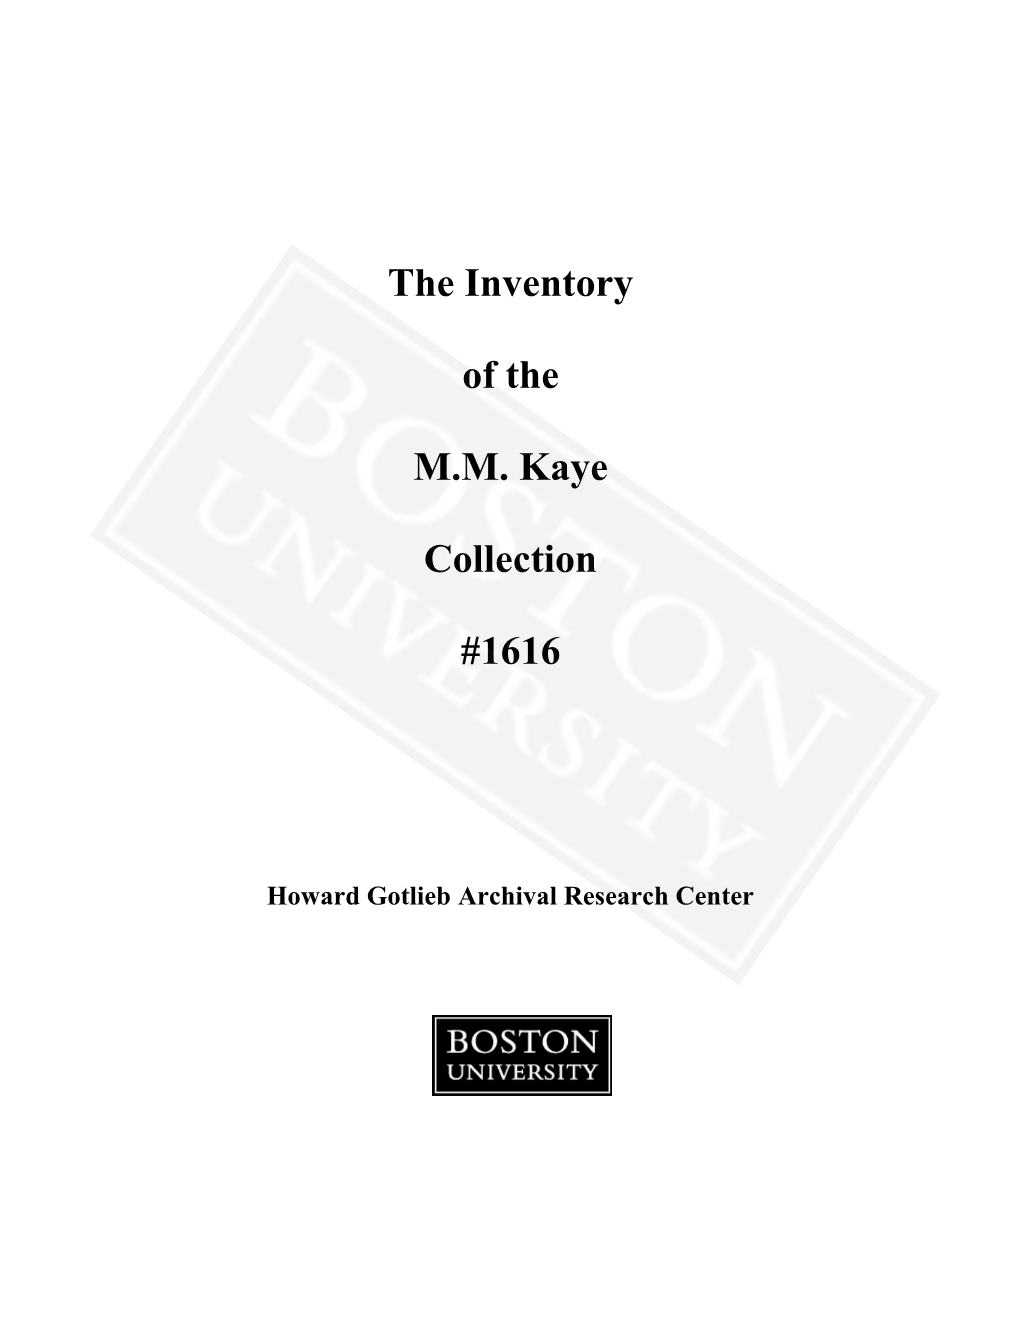 The Inventory of the M.M. Kaye Collection #1616